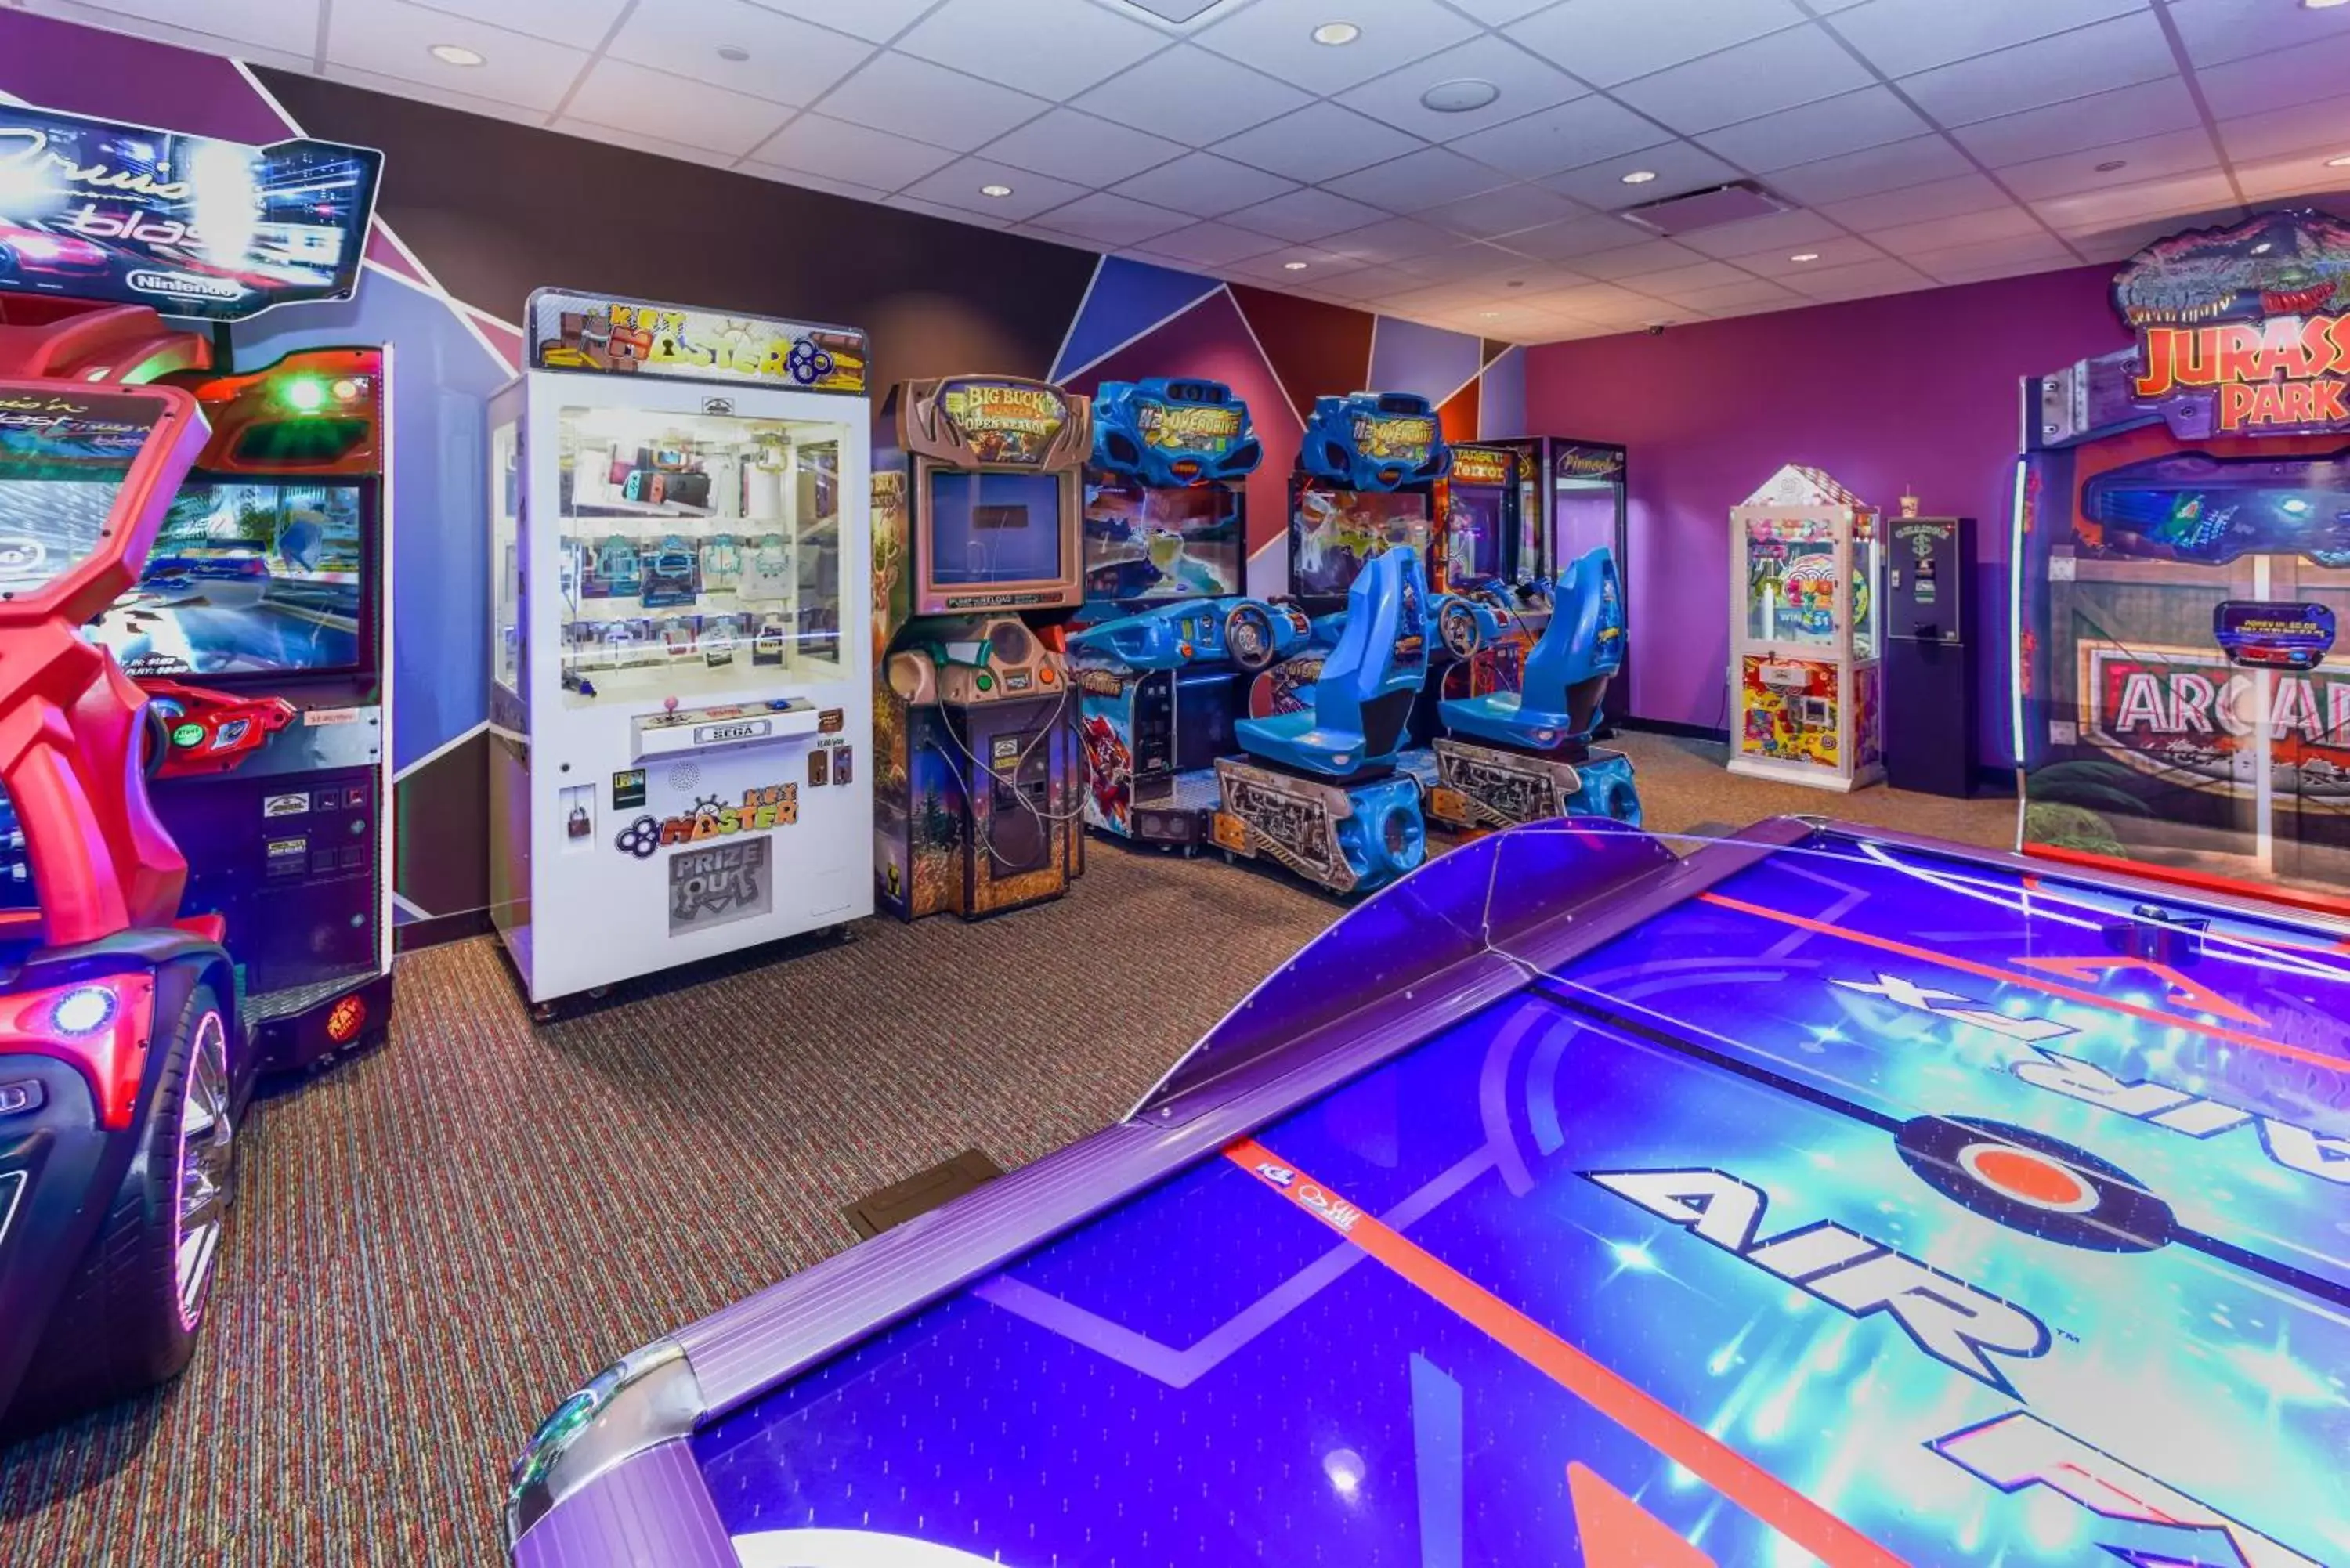 Game Room in Tioga Downs Casino and Resort